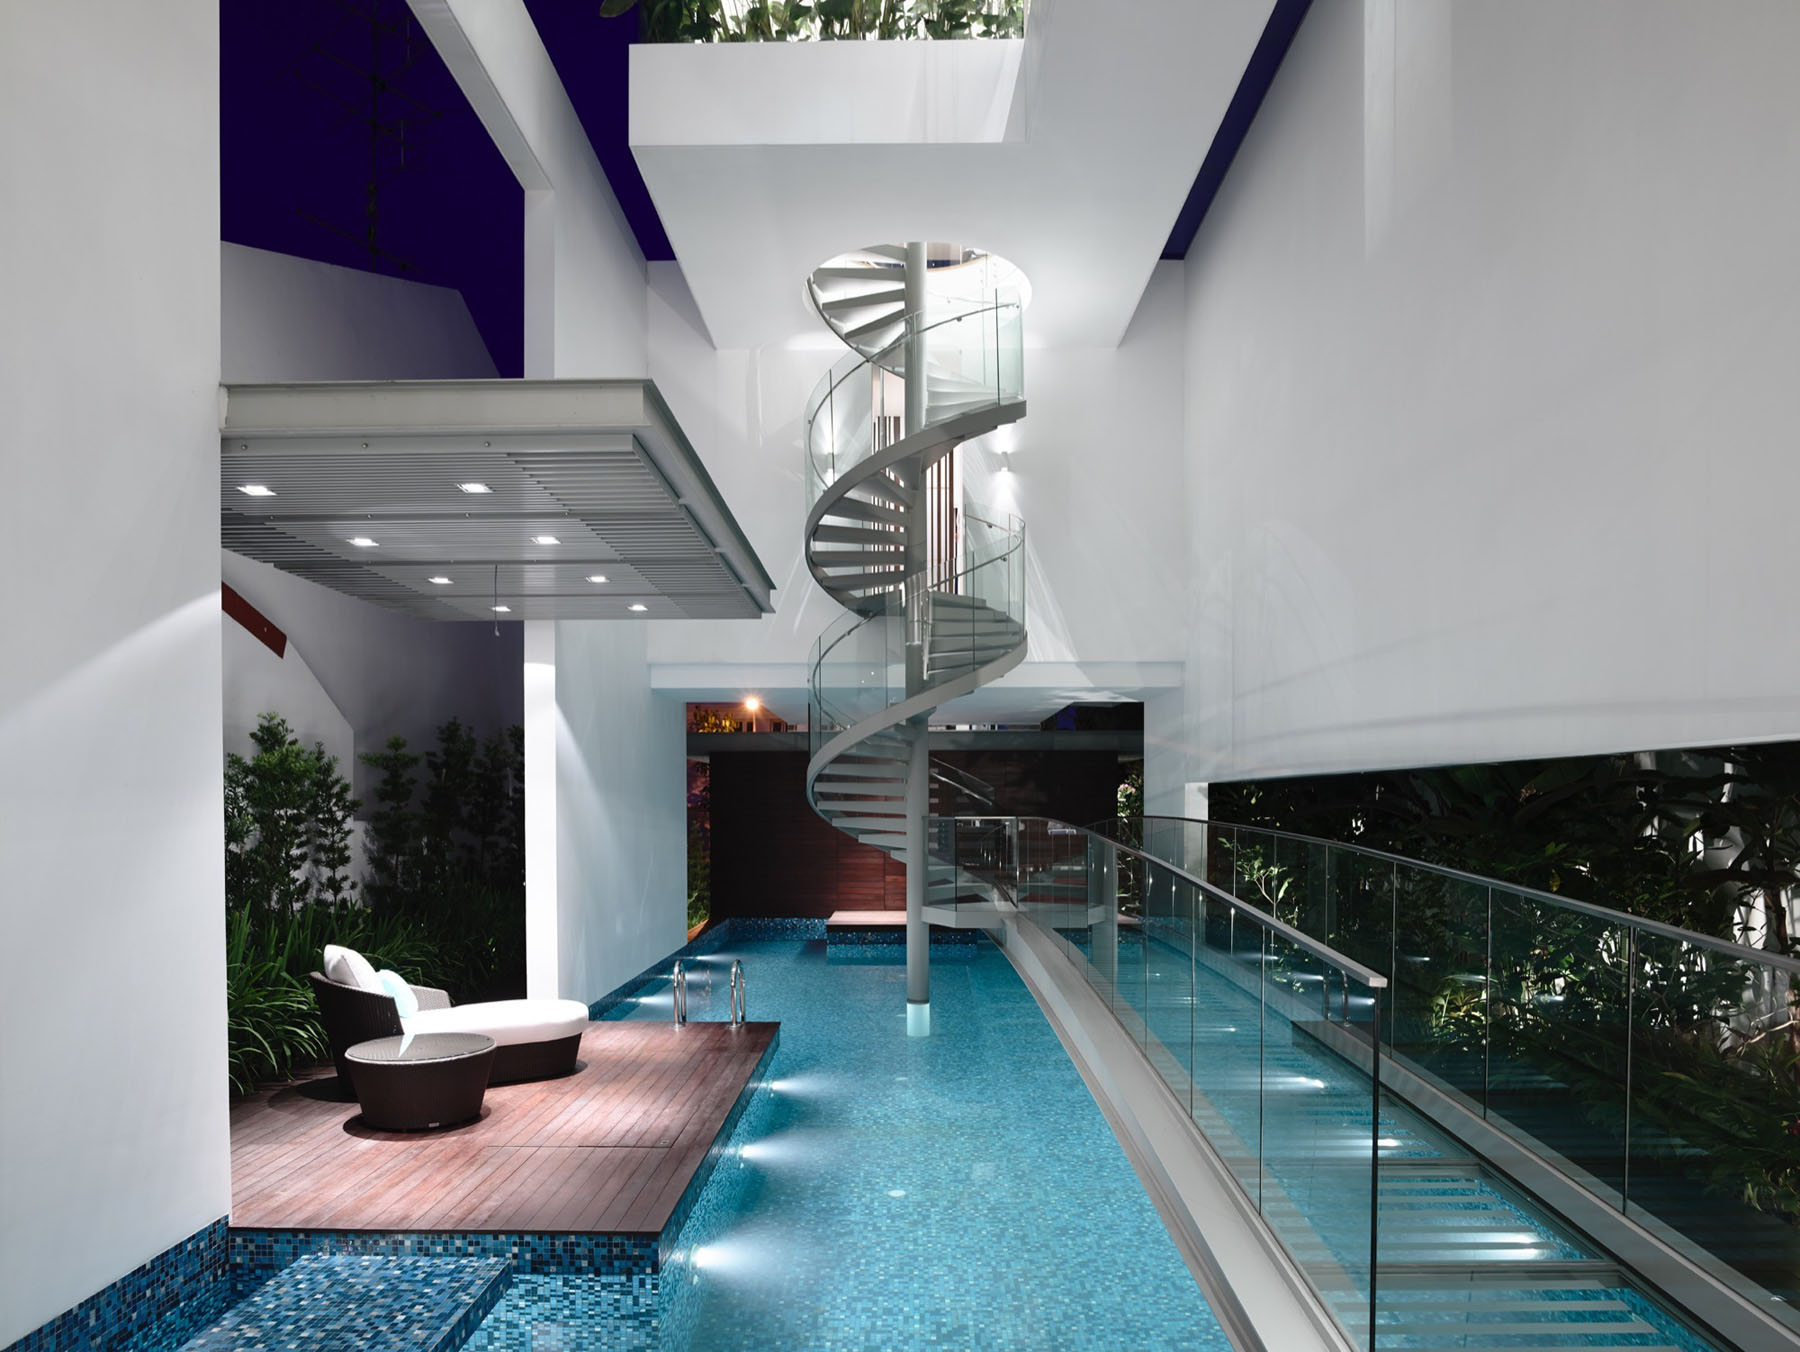 Stylish Modern Home with Interior Swimming Pool and Glass Spiral Staircase